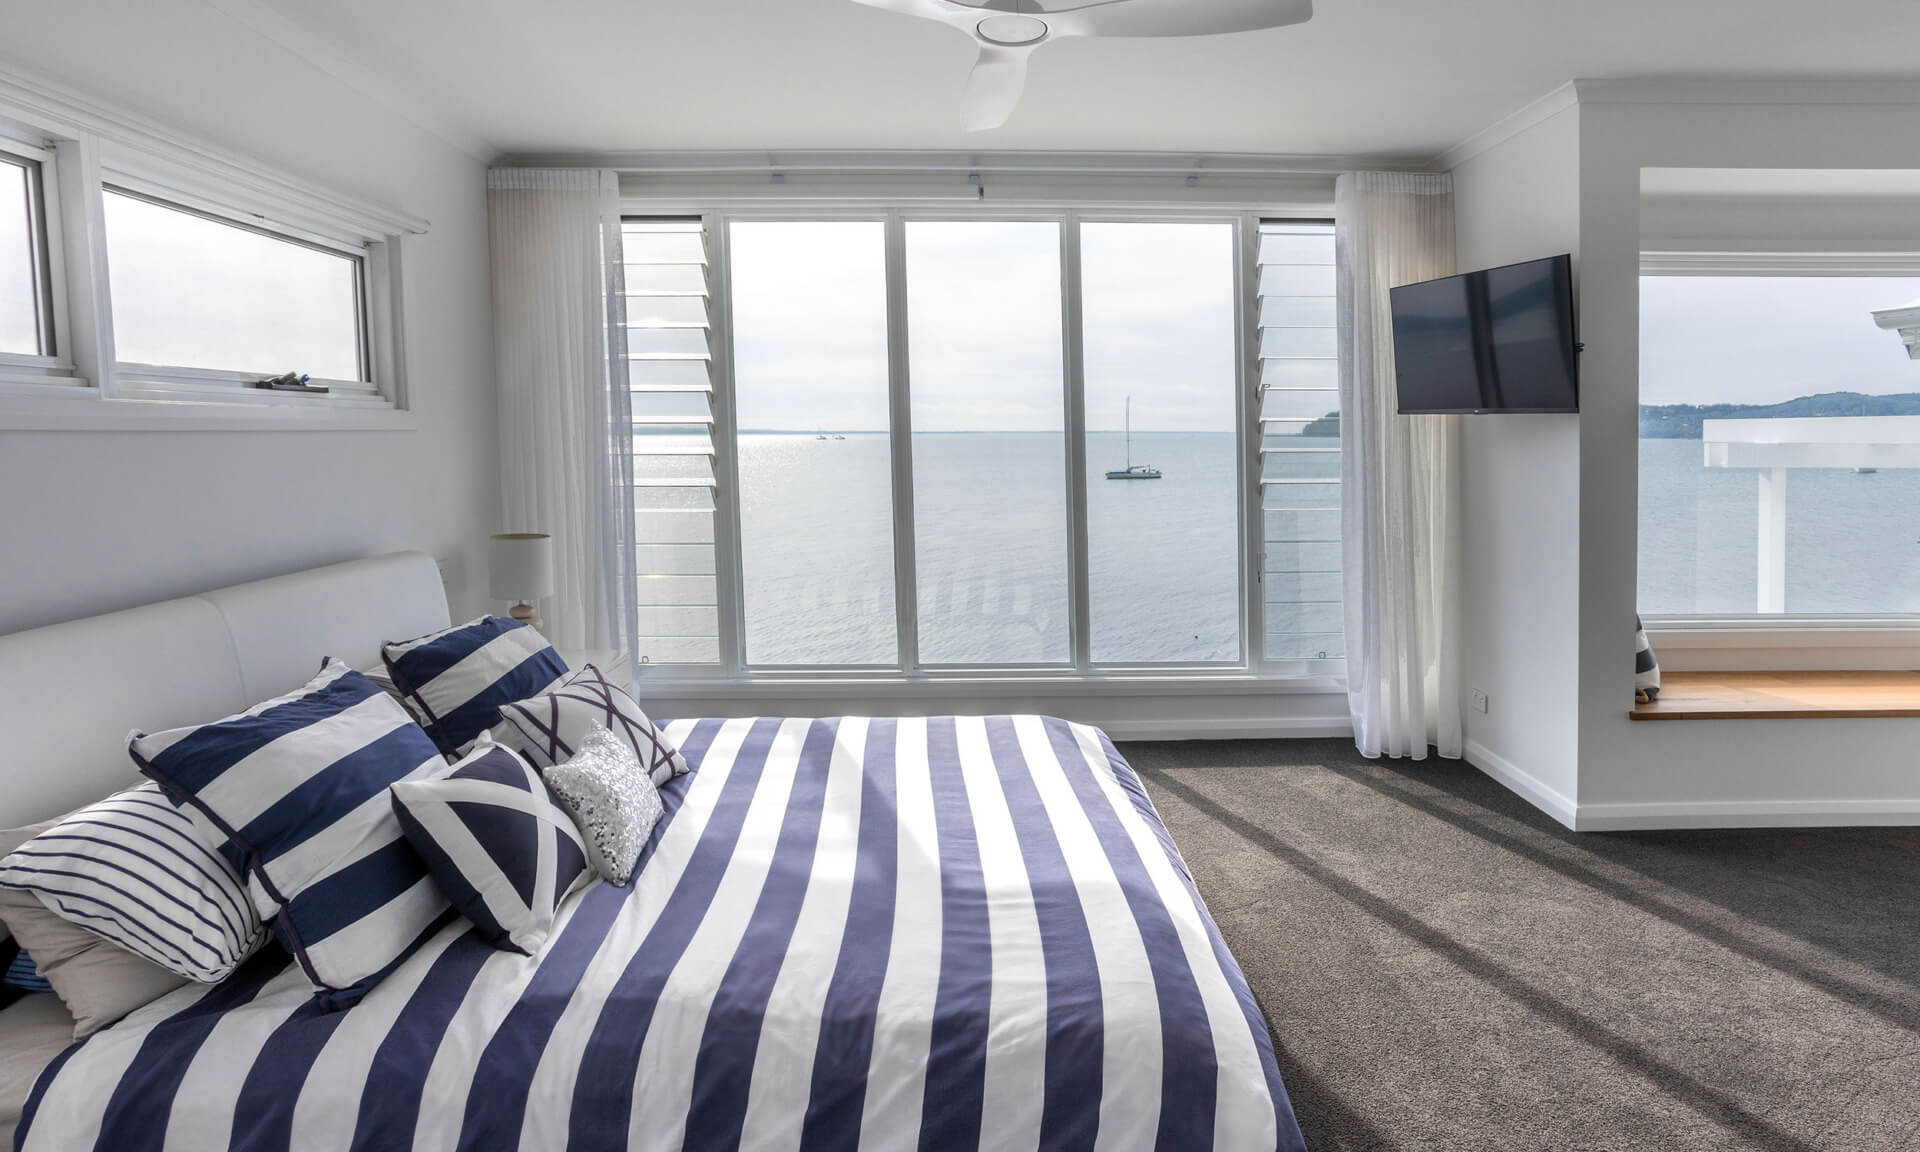 A modern bedroom with blue and white striped bedding, large windows offering a panoramic view of the sea with boats, white walls, a ceiling fan, and a mounted TV on the right.